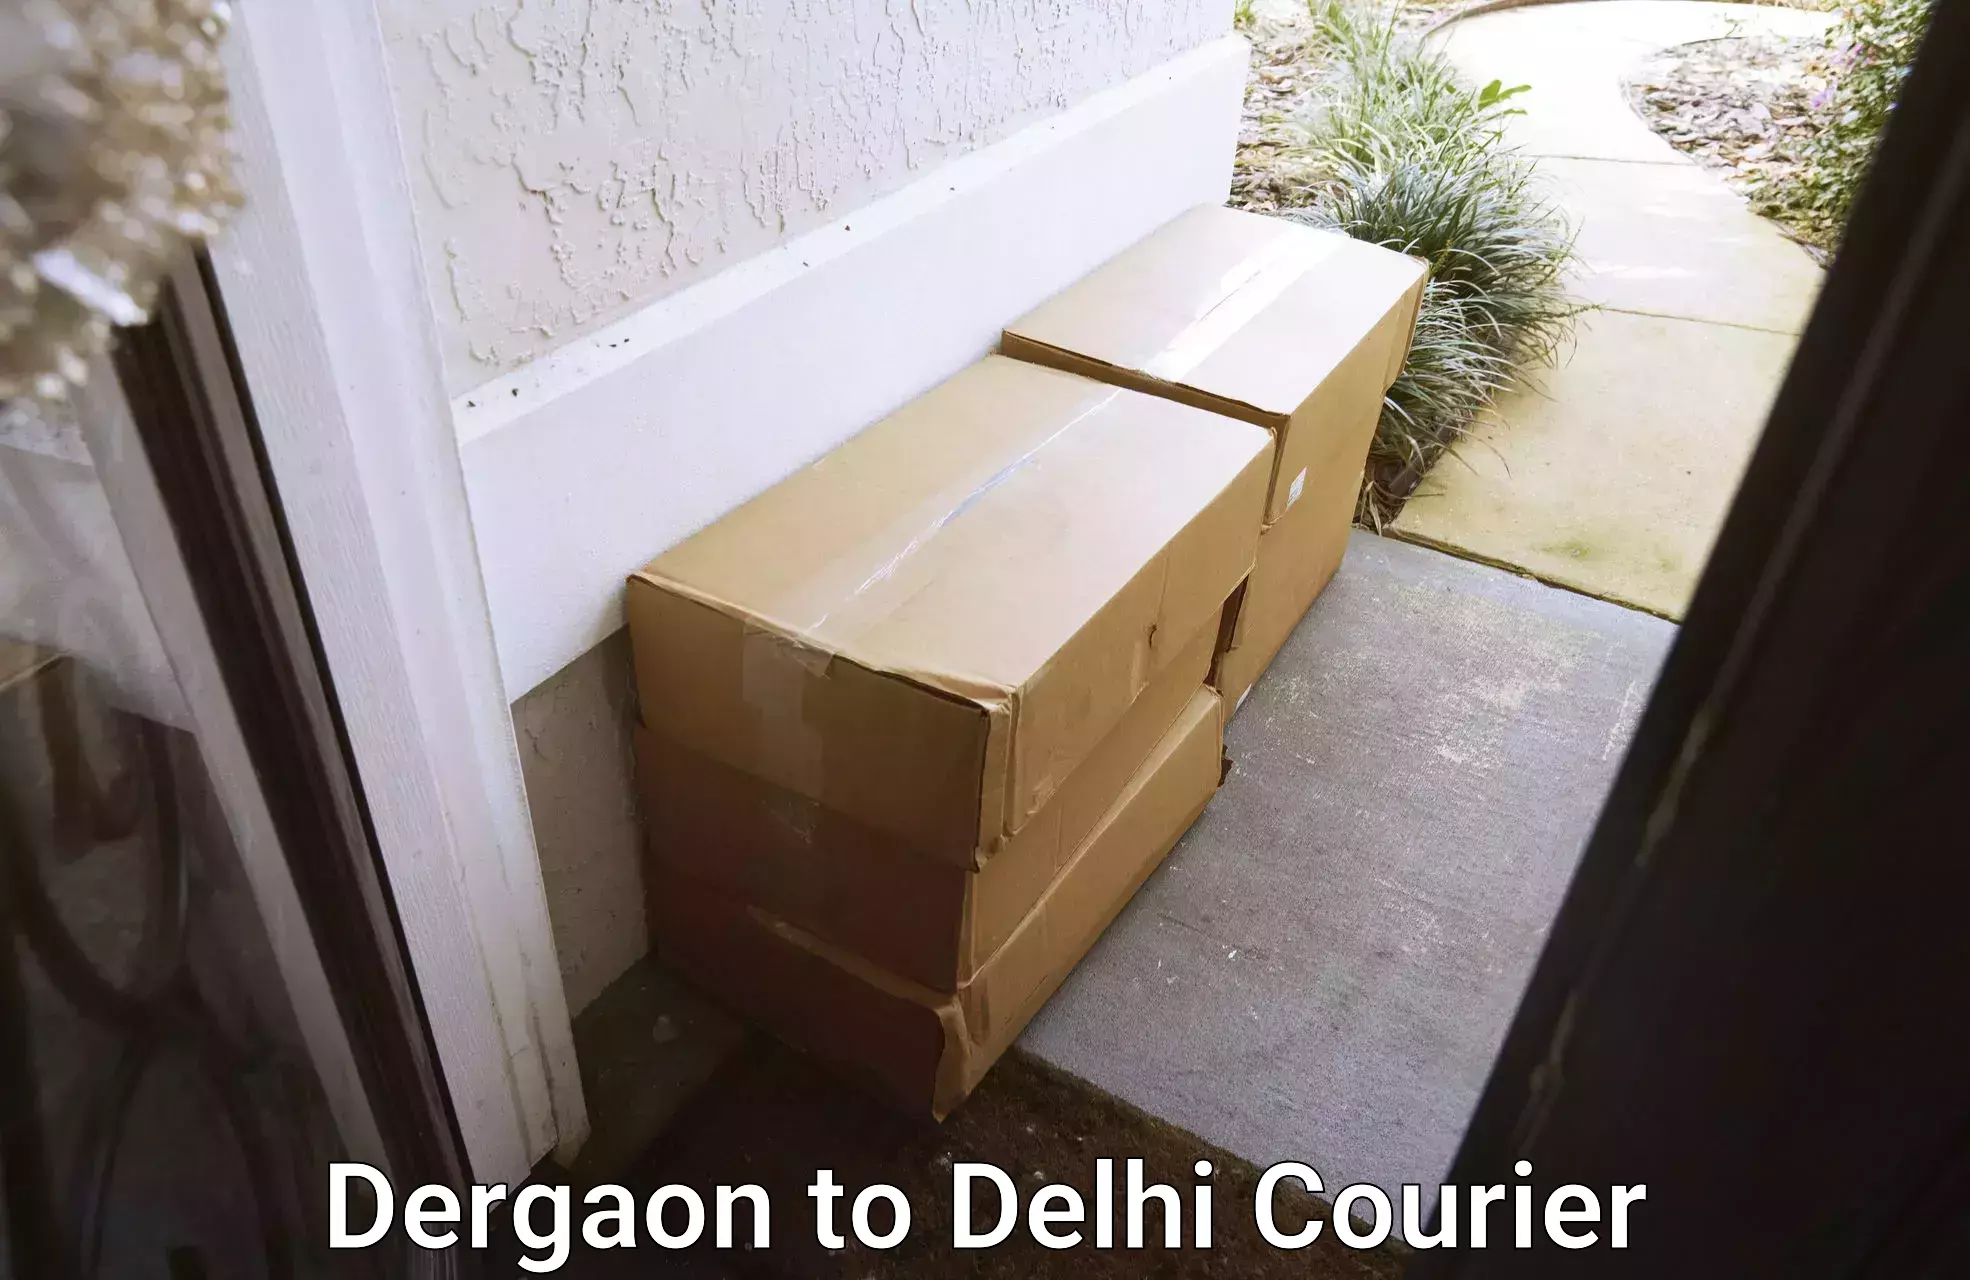 Global shipping solutions Dergaon to Delhi